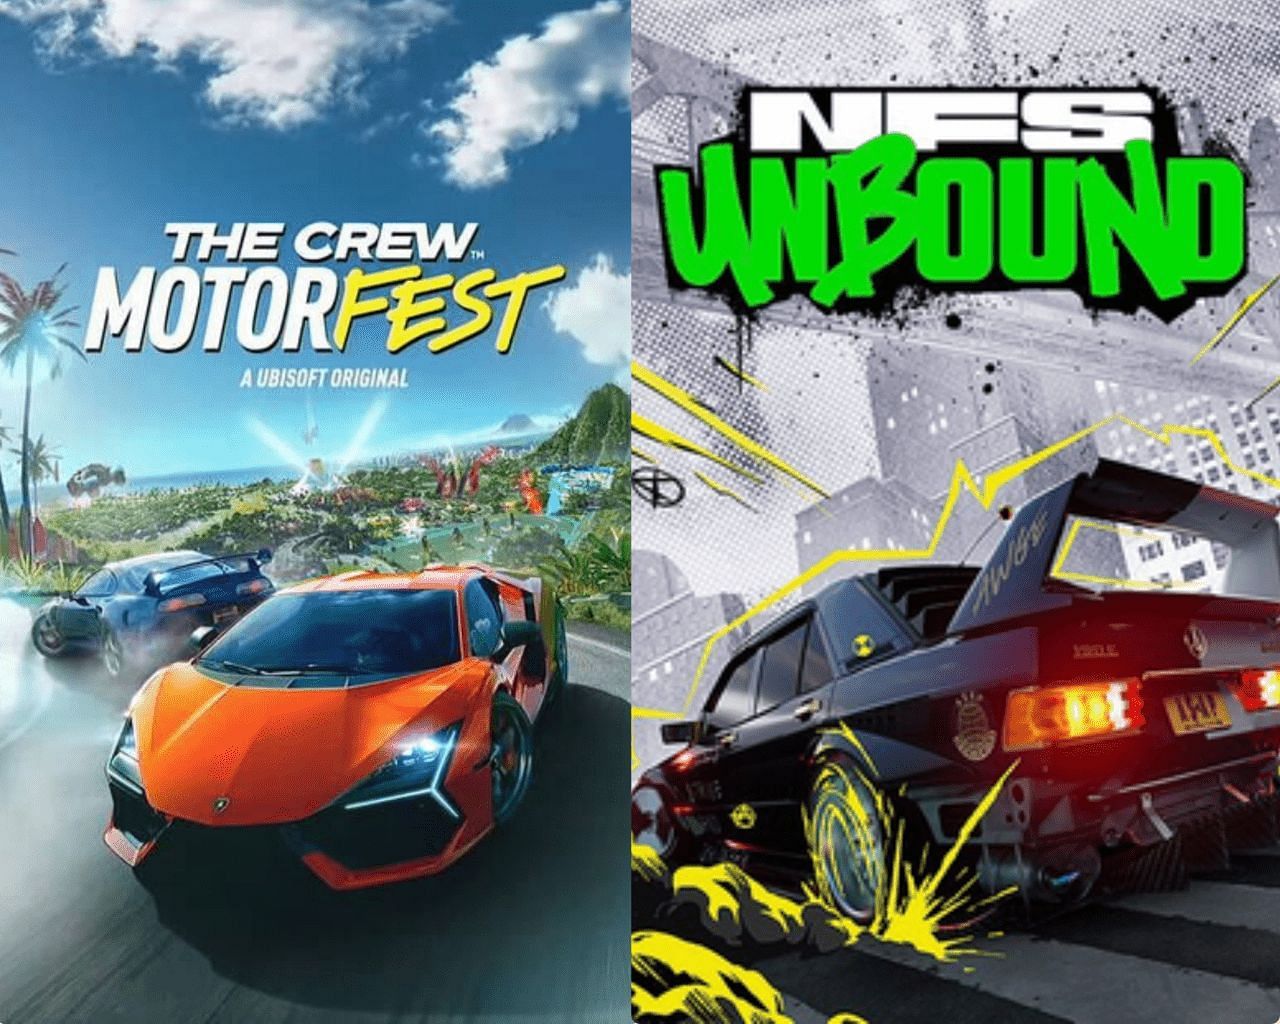 The Crew Motorfest Review - One More Game